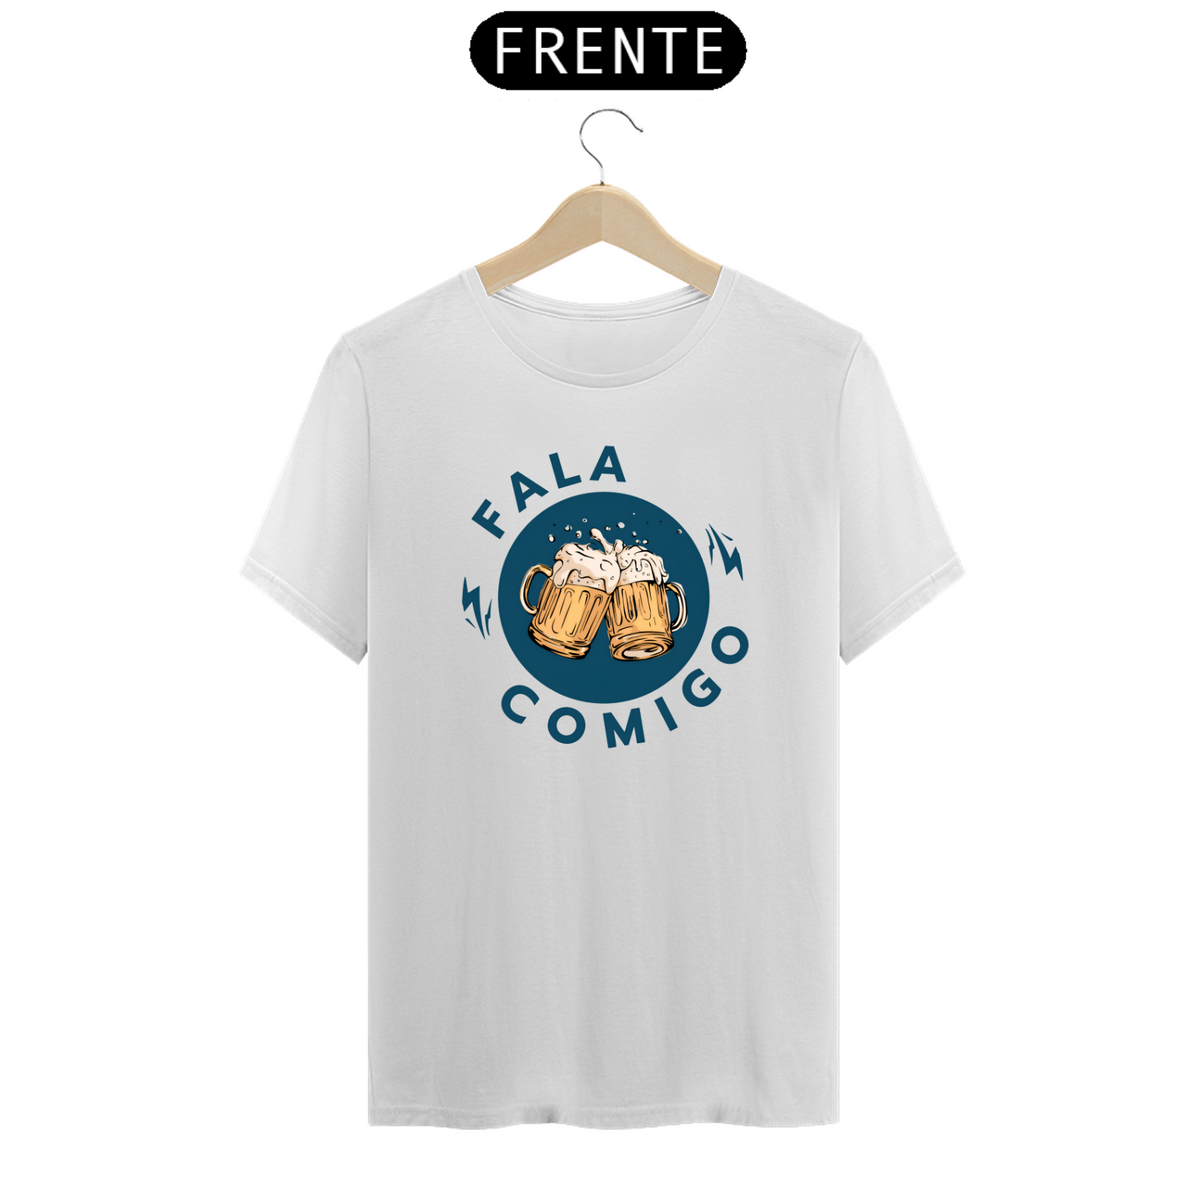 Nome do produto: T-SHIRT CLASSIC - RELAX BE COOL